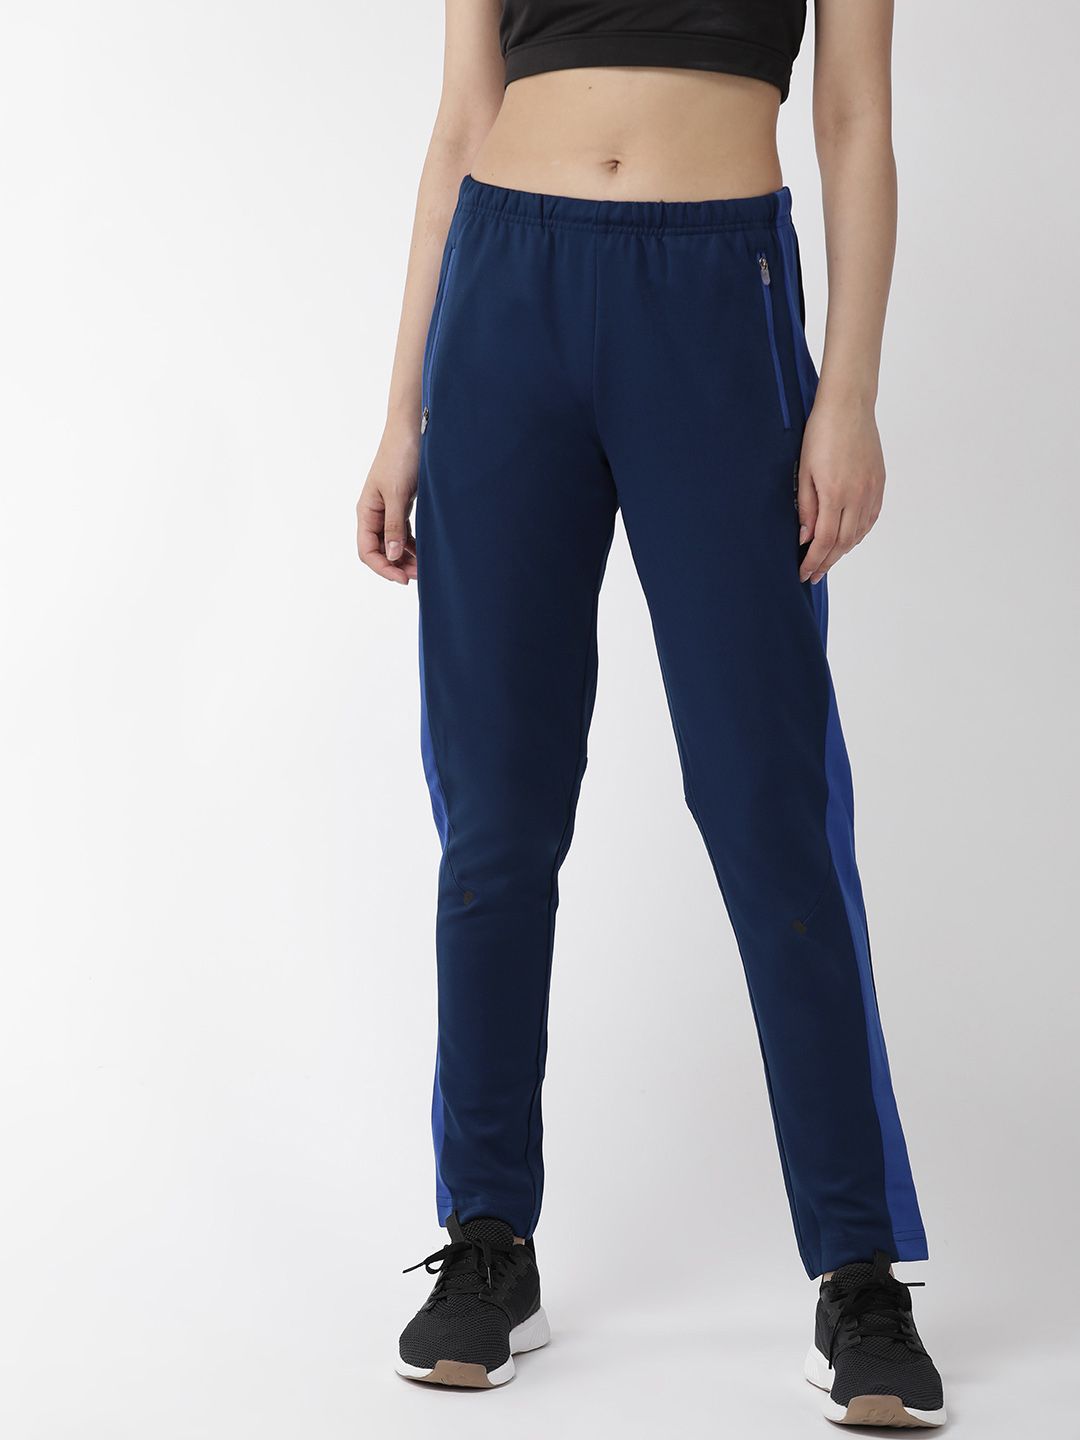 Alcis Women Navy Blue Slim Fit Solid Running Track Pants Price in India